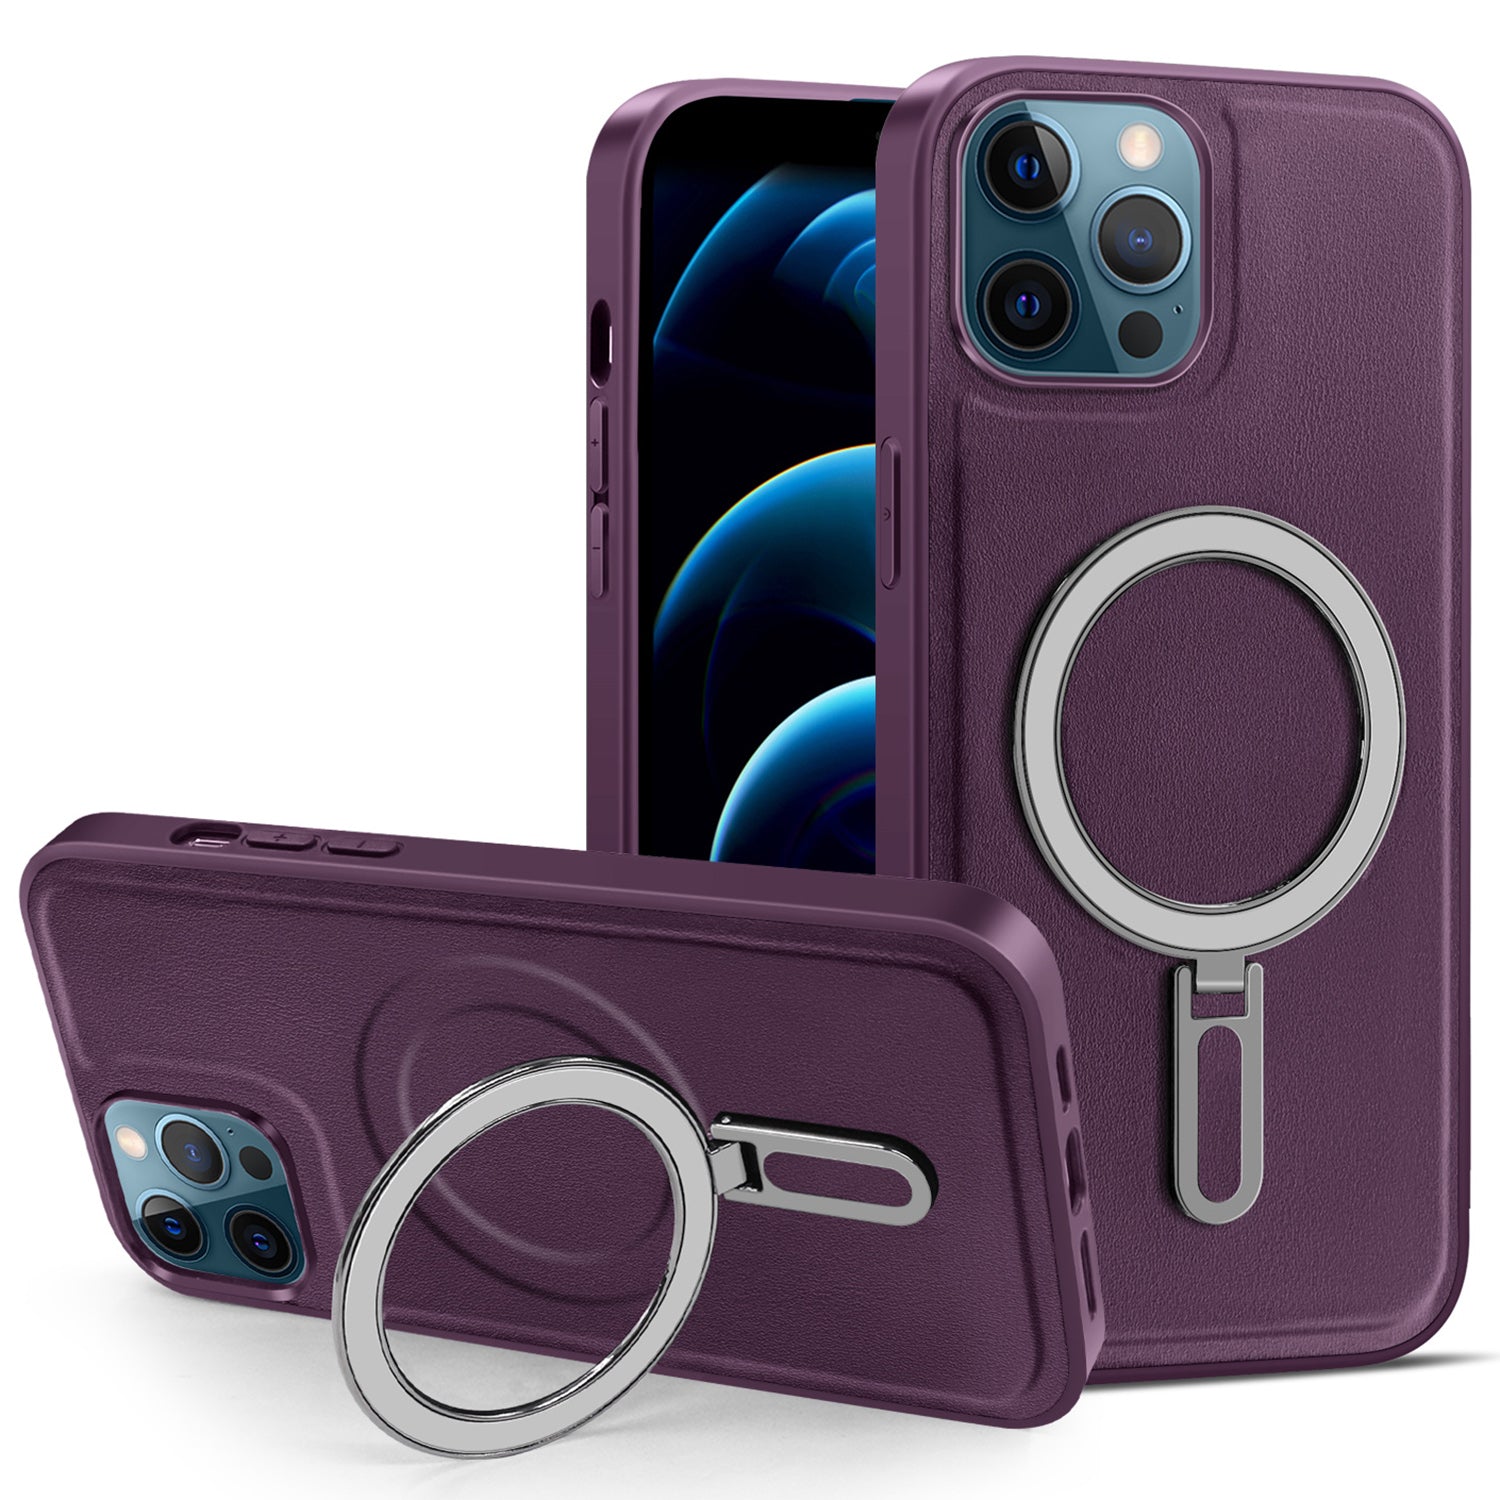 Phone Case for iPhone 12 Pro Max 6.7 inch Kickstand Design PU Leather Coated PC+TPU Magnetic Cover - Purple